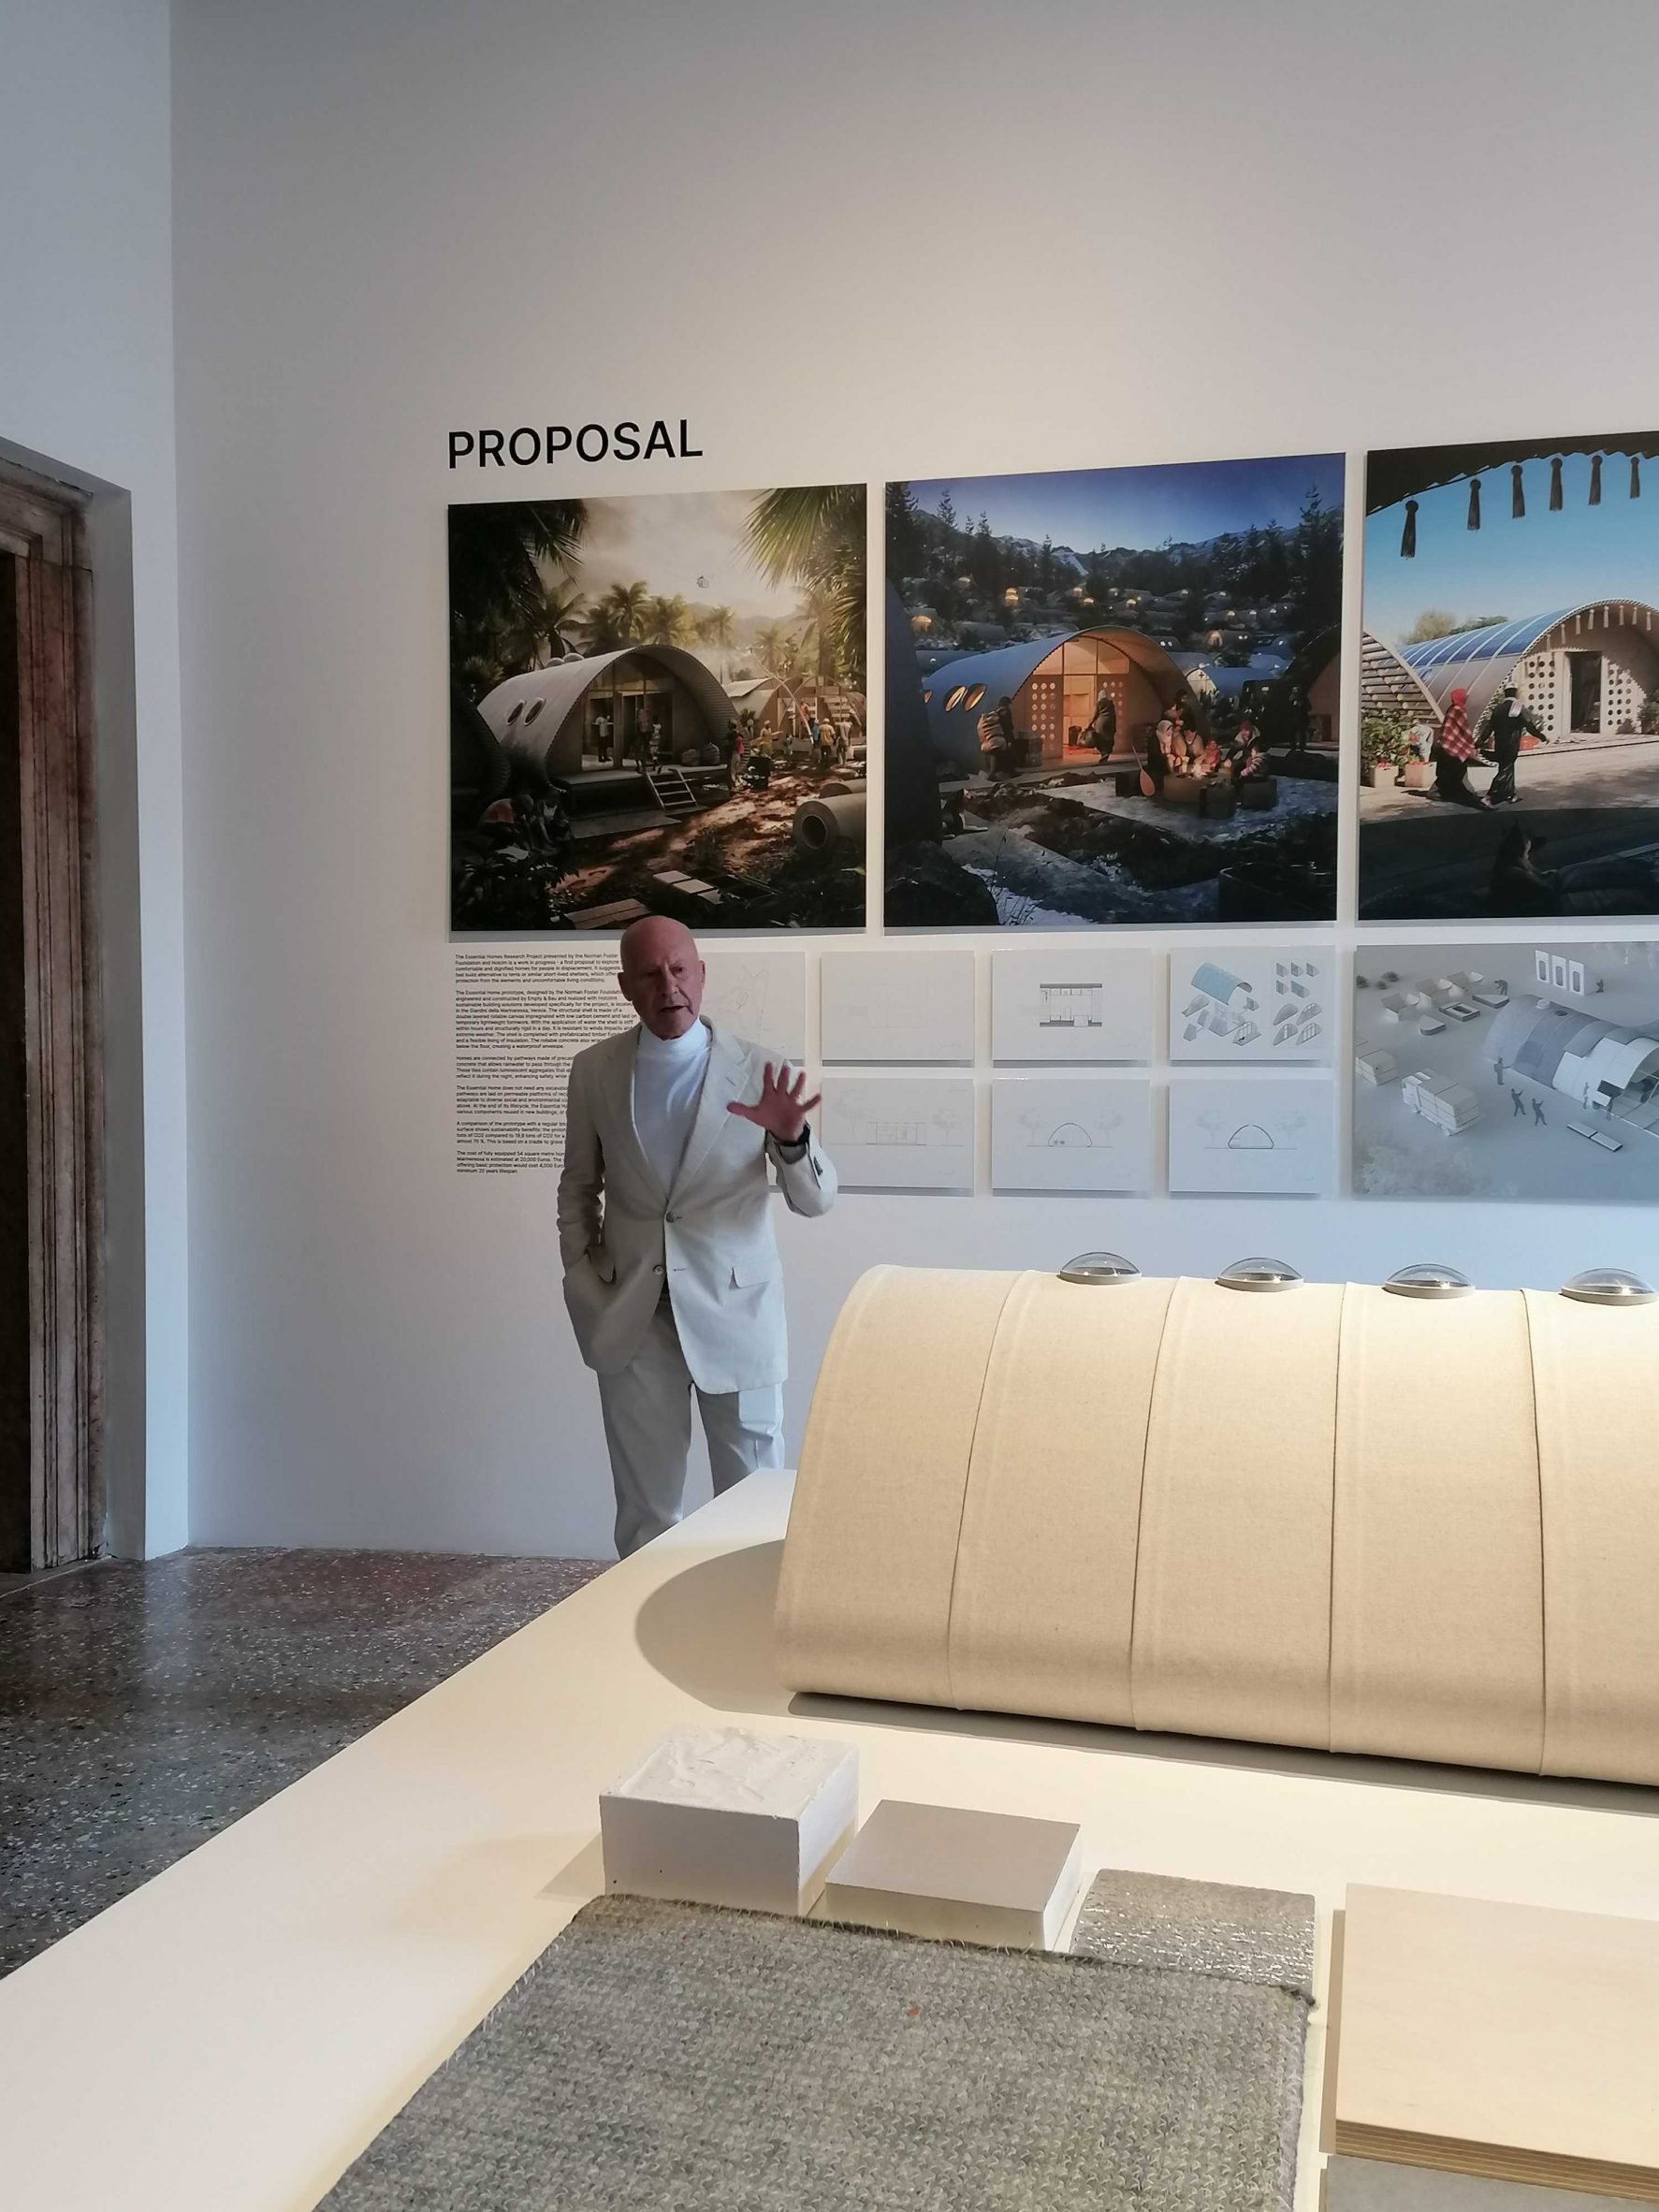 Norman Foster reveals the Essential Homes Research Project in Venice